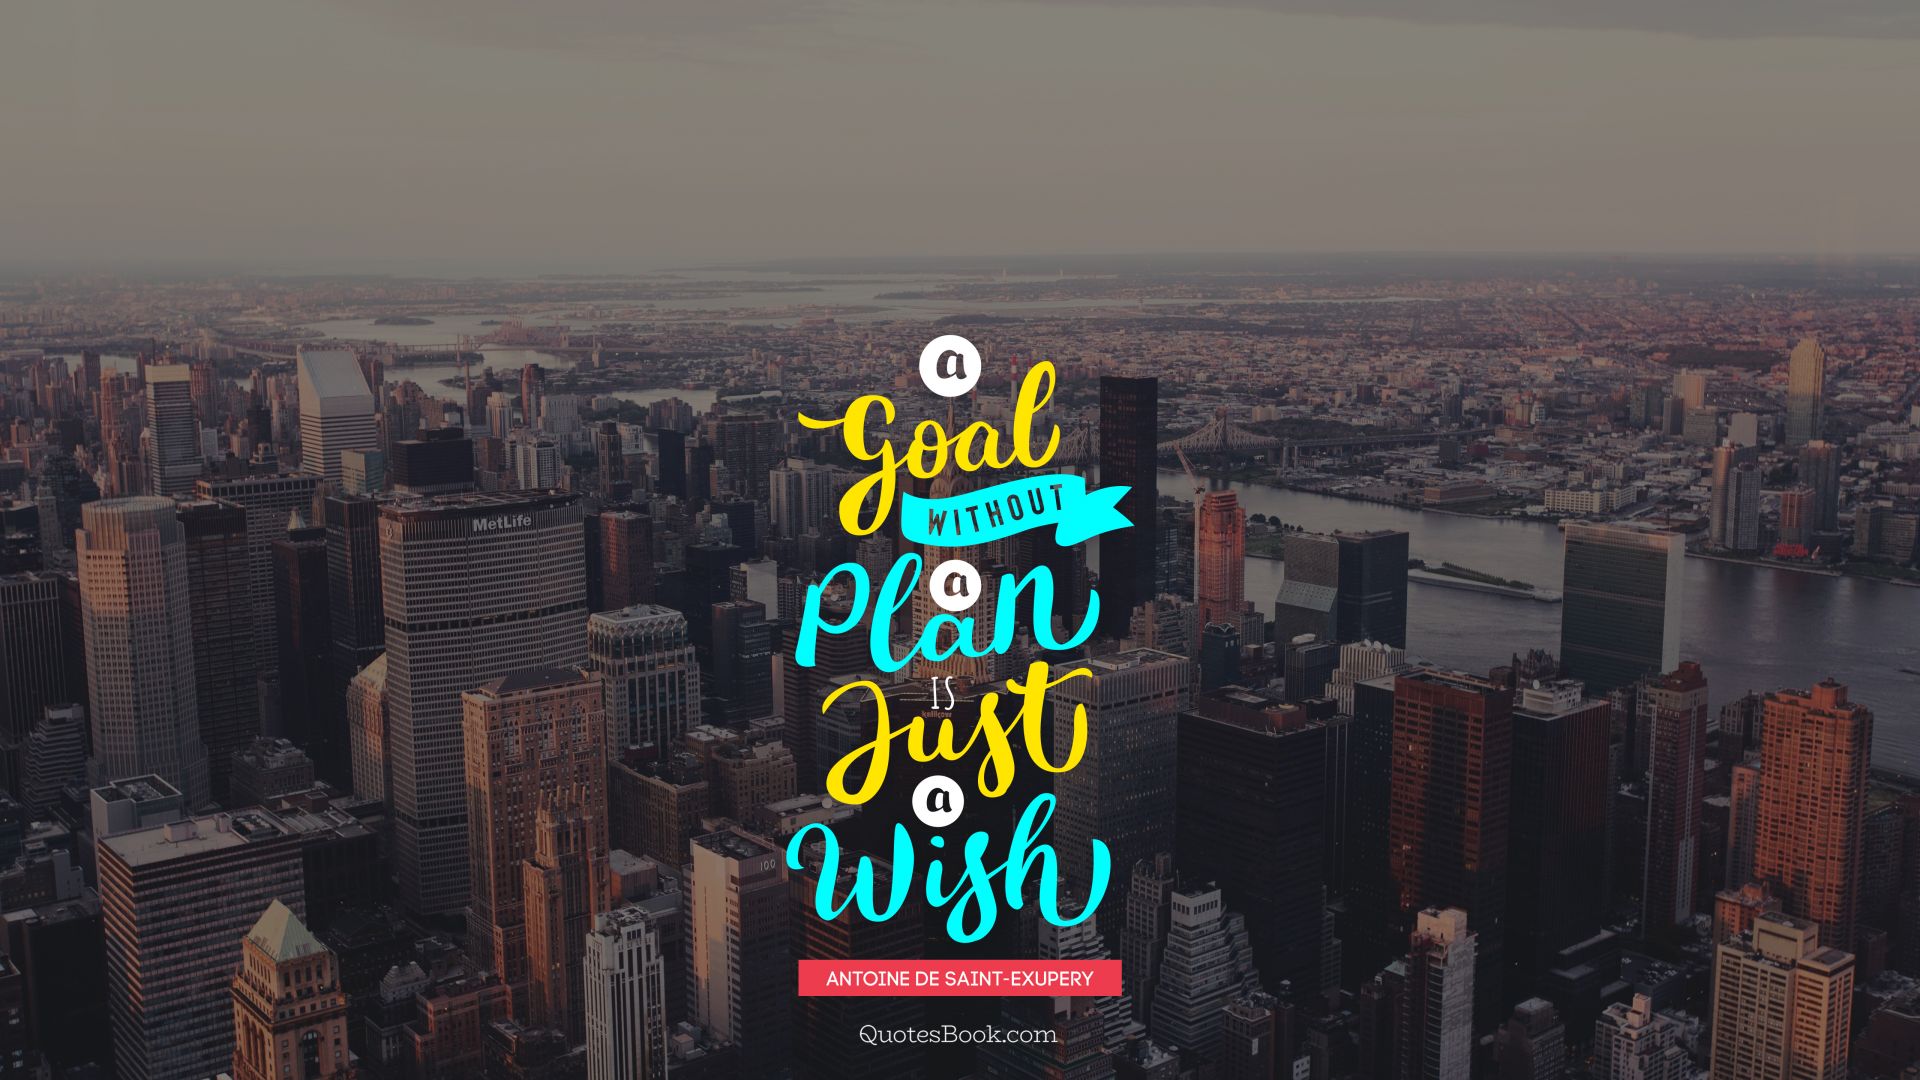 A goal without a plan is just a wish. - Quote by Antoine de Saint-Exupery